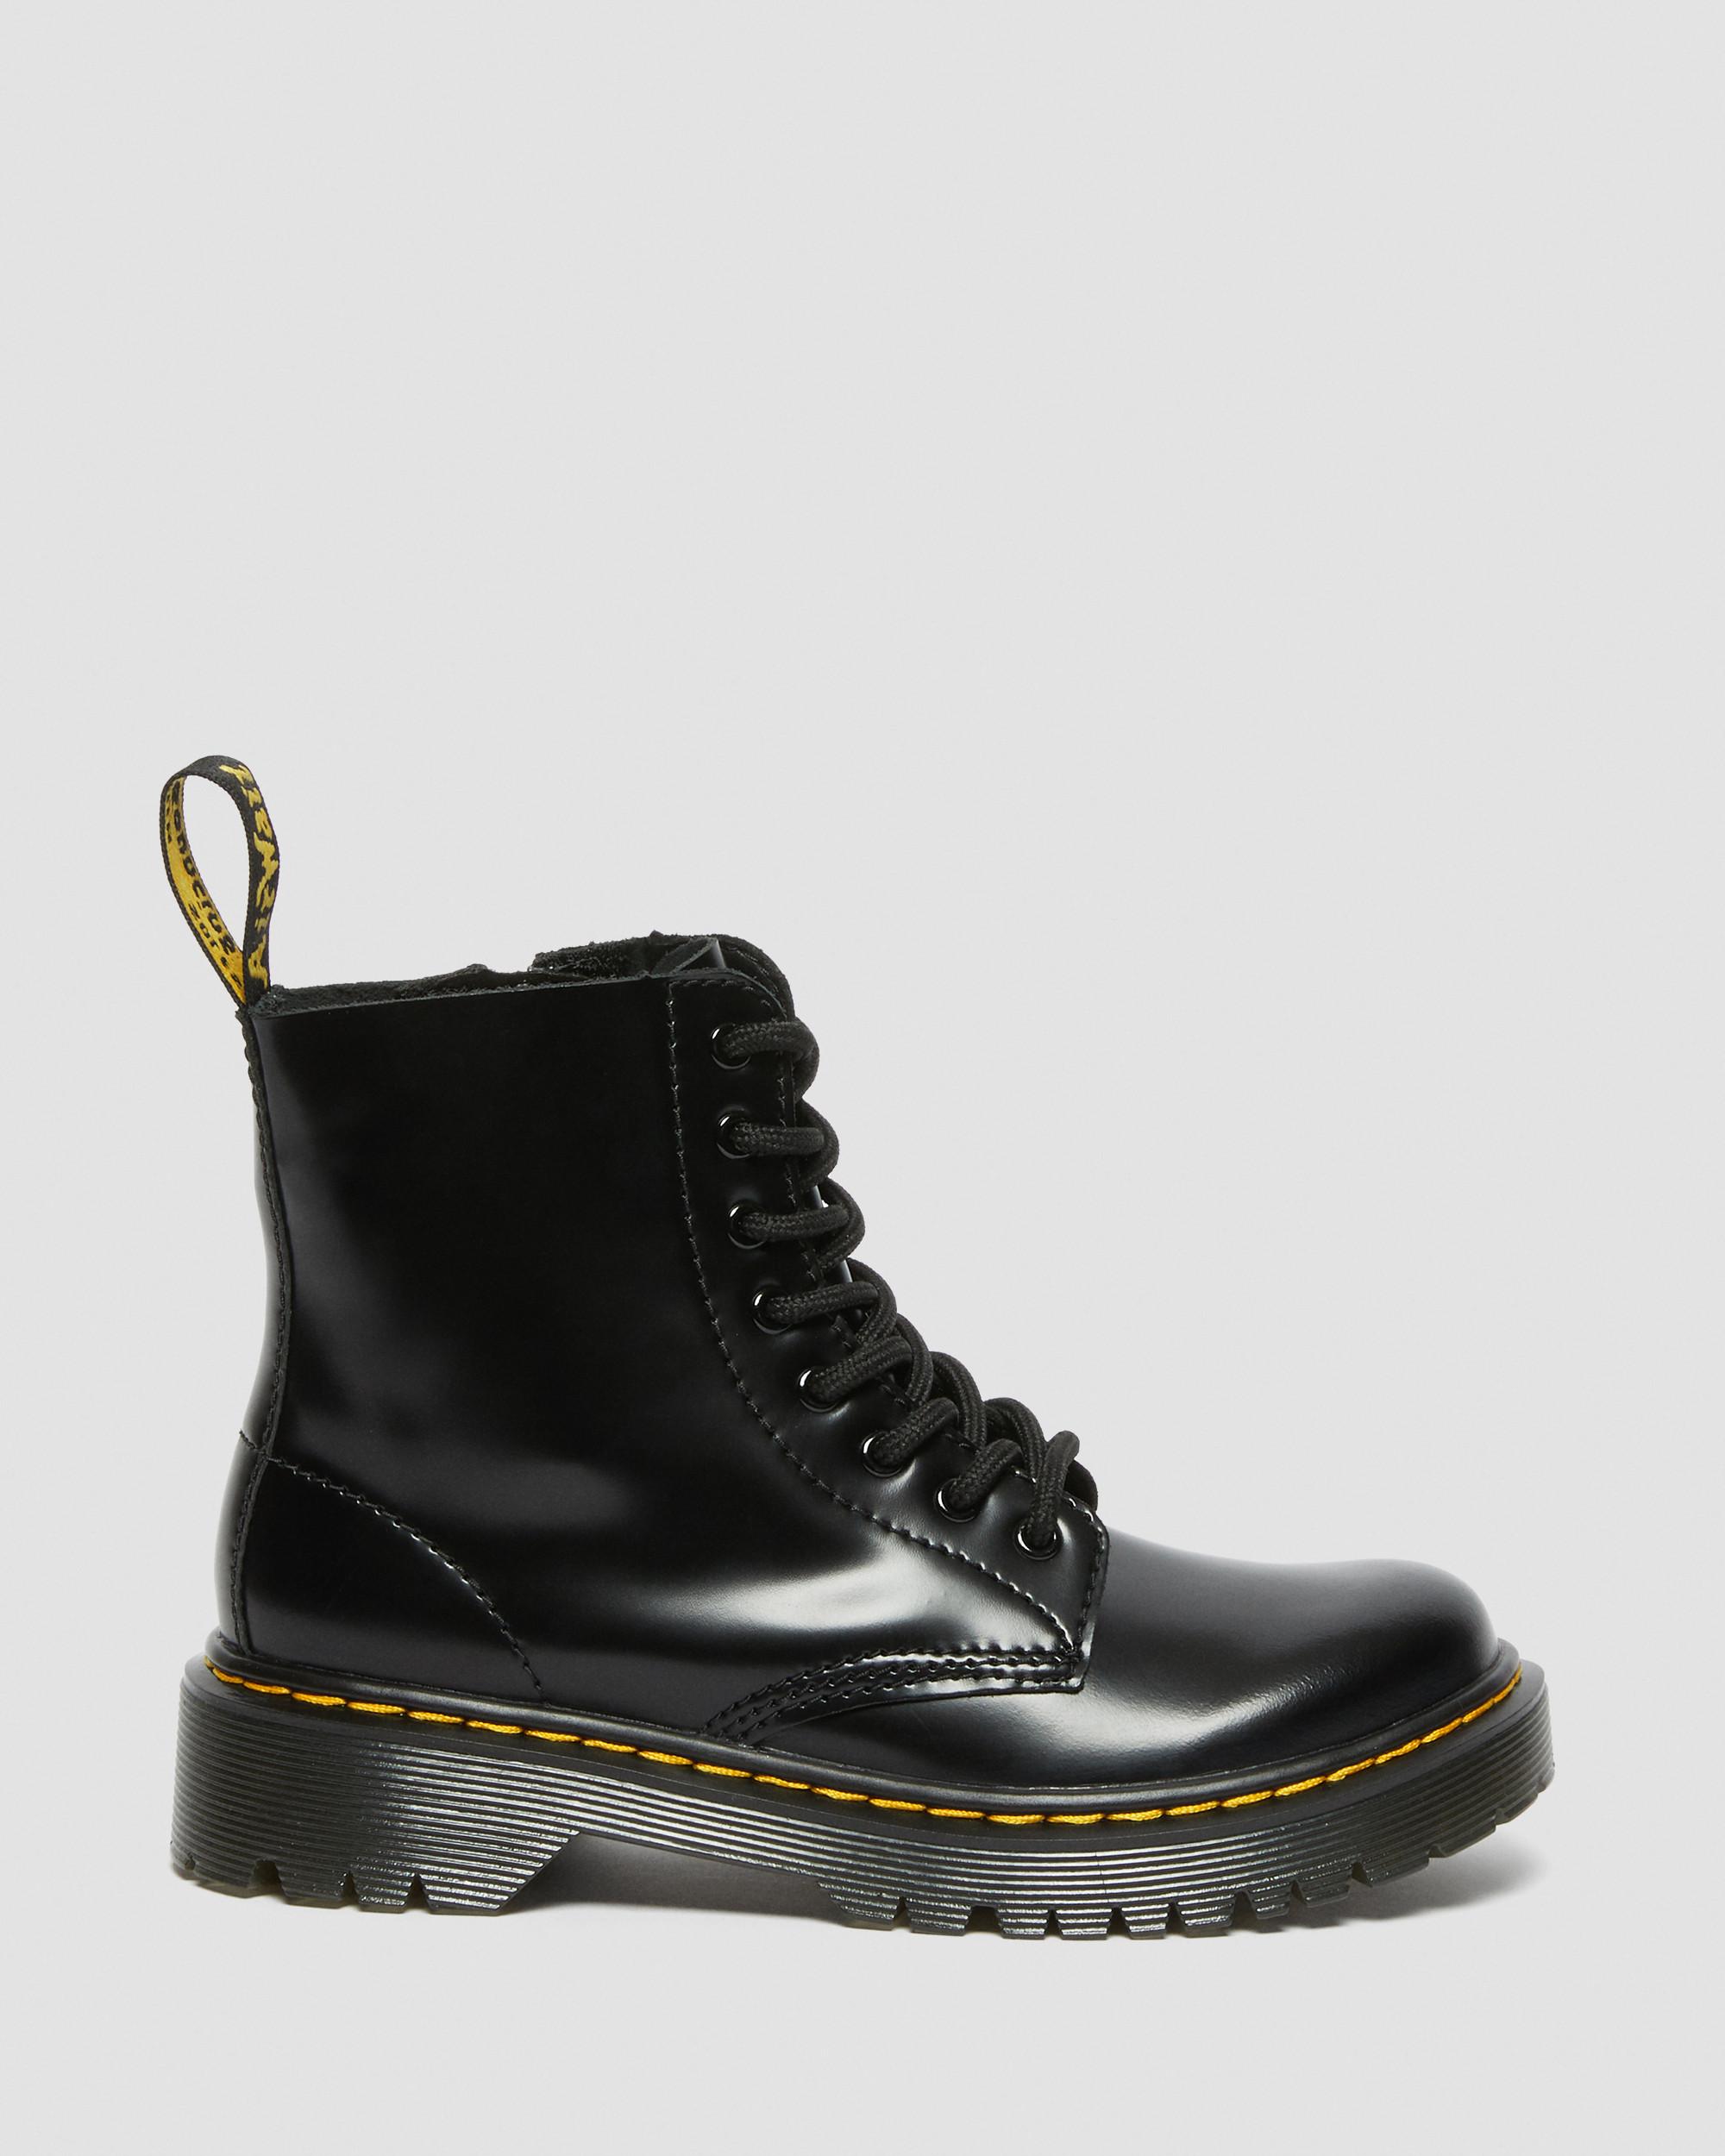 Junior 1460 Pascal Bex Leather Lace Up Boots in Black